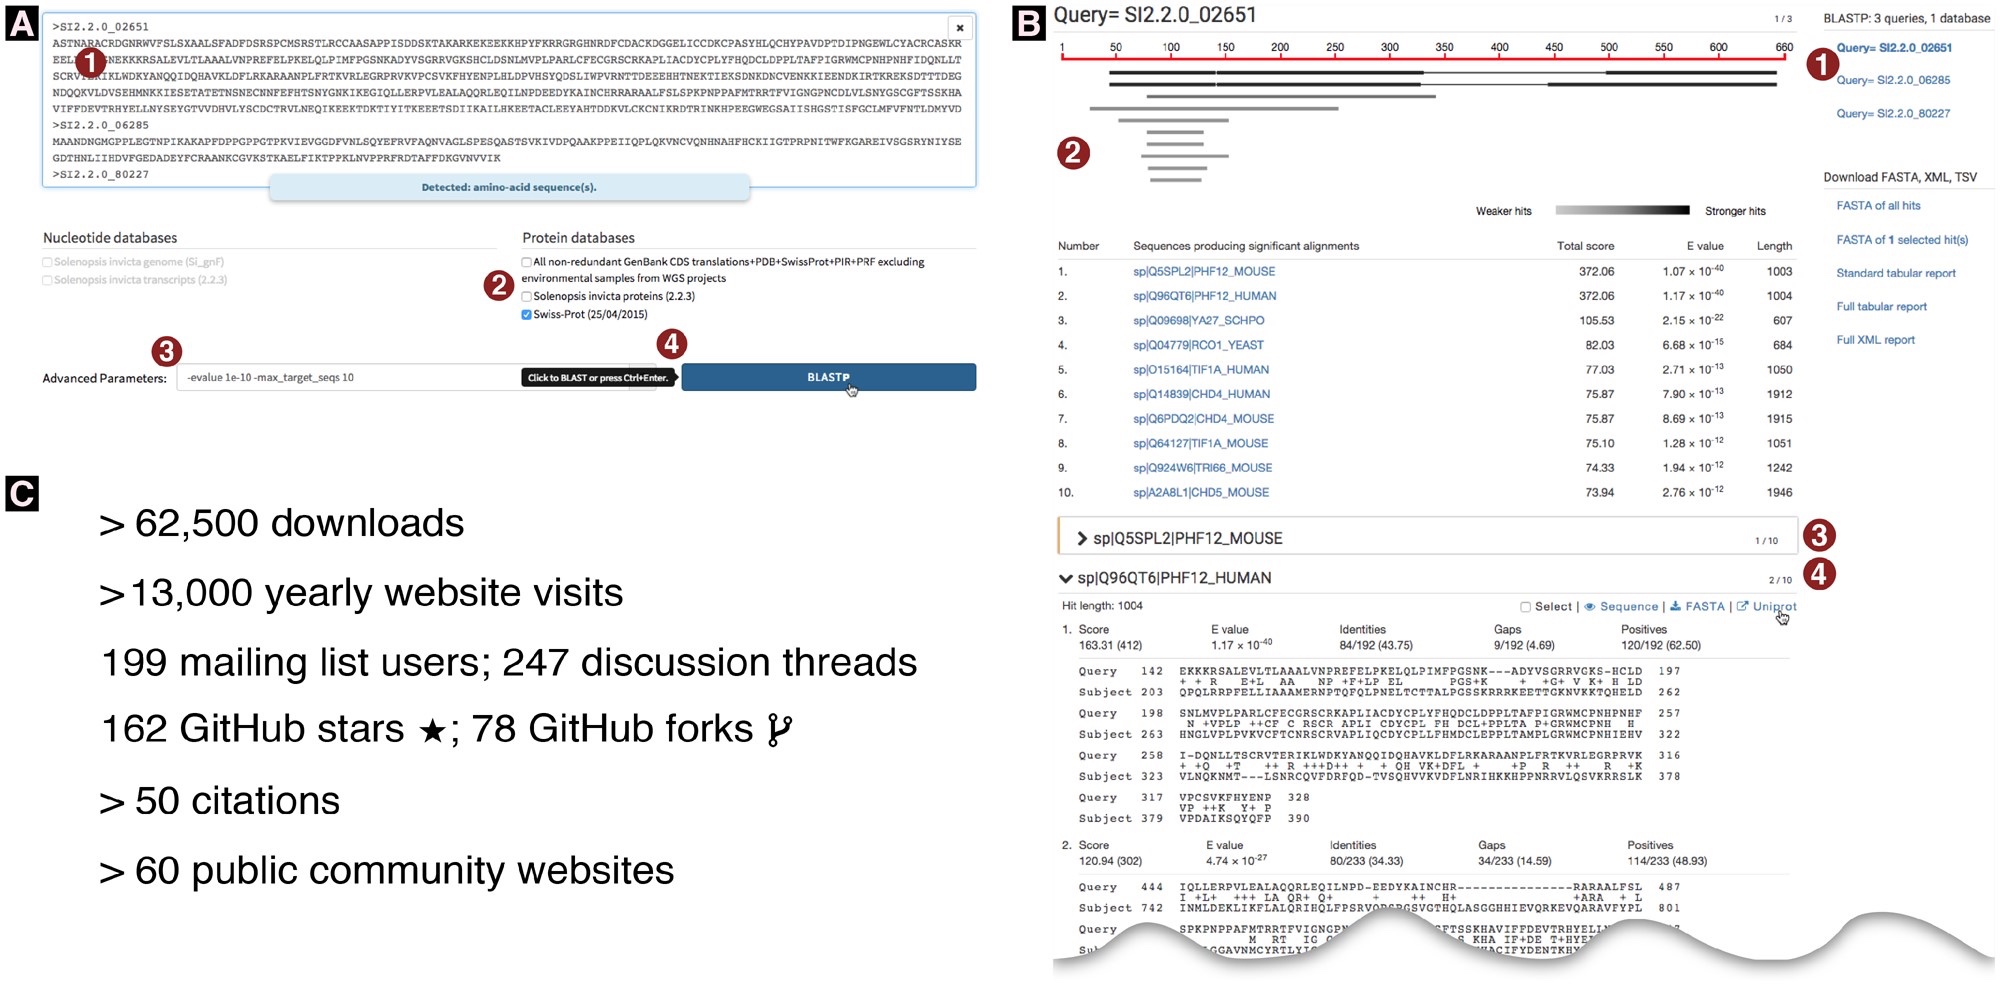 (A) Partial screenshot of the query interface. Numbers circled in red highlight the steps involved and some specific features. (1) Three or more sequences were pasted into the query field (typewriter font; only the identifier is visible for the third sequence); a message confirms to the user that these are amino acid sequences. (2) The Swiss-Prot protein database was the first database to be selected. As a result, additional database selections are limited to protein databases; nucleotide databases are disabled. (3) Optional advanced parameters were entered which constrain the results to the ten strongest hits with E-values stronger than 10−10. (4) The BLAST button is automatically activated and labeled “BlastP” as this is the only possible basic BLAST algorithm for the given query-database combination. As the user’s mouse pointer hovers over the BlastP button, a tooltip indicates that a keyboard shortcut exists for this button. (B) Partial screenshot of a Sequenceserver BLAST report. An interactive version of this figure is online at [https://sequenceserver.com/paper/resultsinteractive/](https://sequenceserver.com/paper/resultsinteractive/) (last accessed August 25, 2019). Three amino acid sequences were compared against the Swiss-Prot database using BlastP with an E-value cutoff of 10−10 and keeping only the ten strongest hits per query. This screenshot shows a portion of the results for the first query. Numbers circled in red highlight some specific features of this report. (1) An index overview summarizes the query and database information and provides clickable links to query-specific results. (2) Results for the first query are shown. These include a graphical overview indicating which parts of the query sequence align to each hit, a tabular summary of all hits, and alignment details for each hit. (3) The first hit is selected for download; its alignment details have been folded away. (4) The user is studying the second hit; the mouse pointer hovers over the link to the hit’s UniProt page. (C) Sequenceserver usage as of June 11, 2019. These include download statistics from https://rubygems.org/gems/sequenceserver, Google Analytics statistics for https://sequenceserver.com, and citation statistics from https://app.dimensions.ai/details/publication/pub.1085102830, and GitHub statistics from https://github.com/wurmlab/sequenceserver.